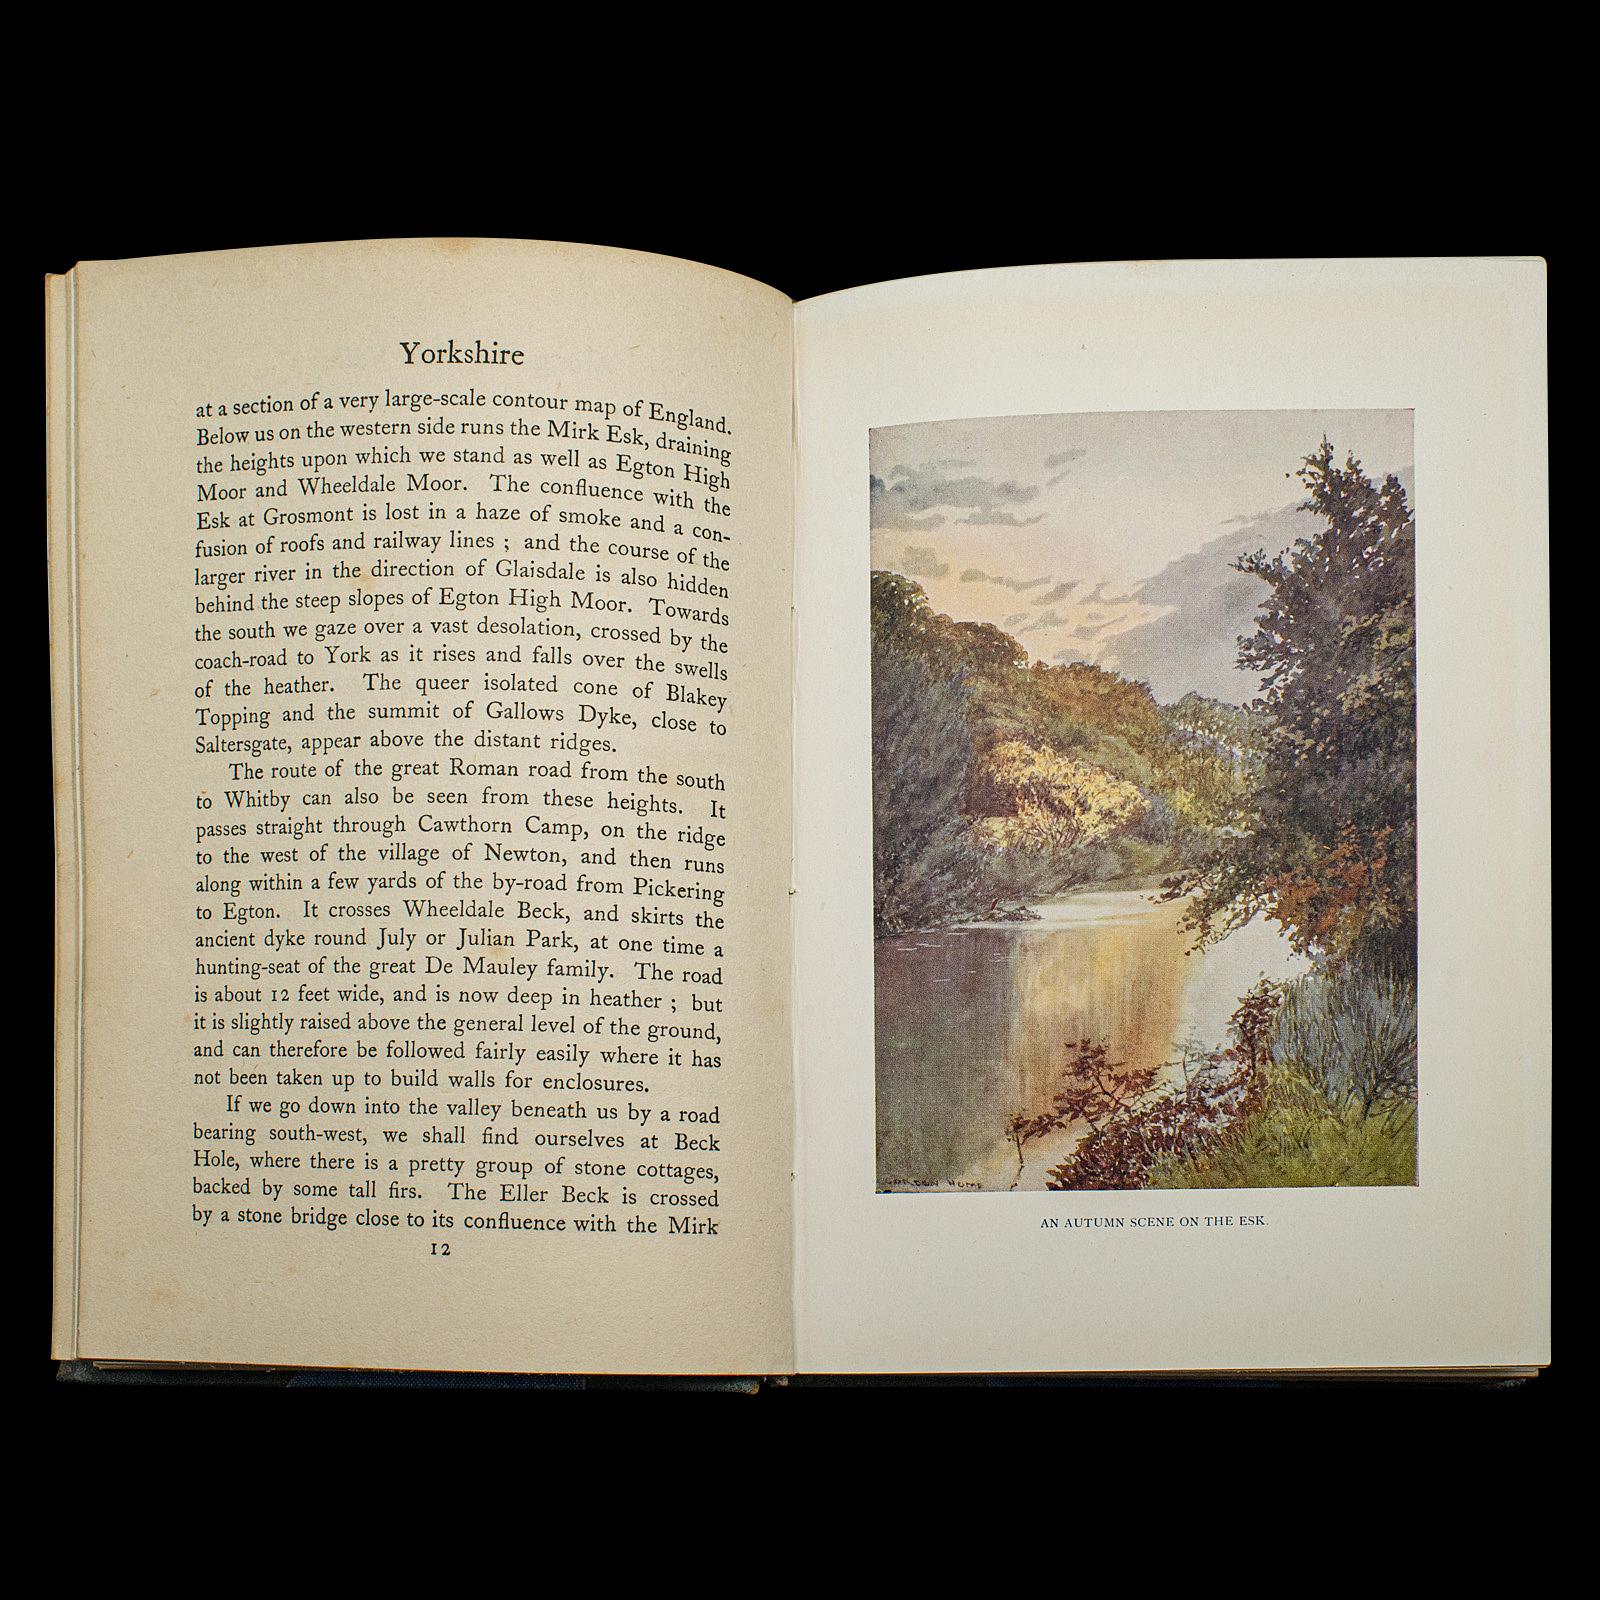 20ième siècle Vintage Illustrated Book, Yorkshire By George Home, Anglais, County Travel Guide en vente